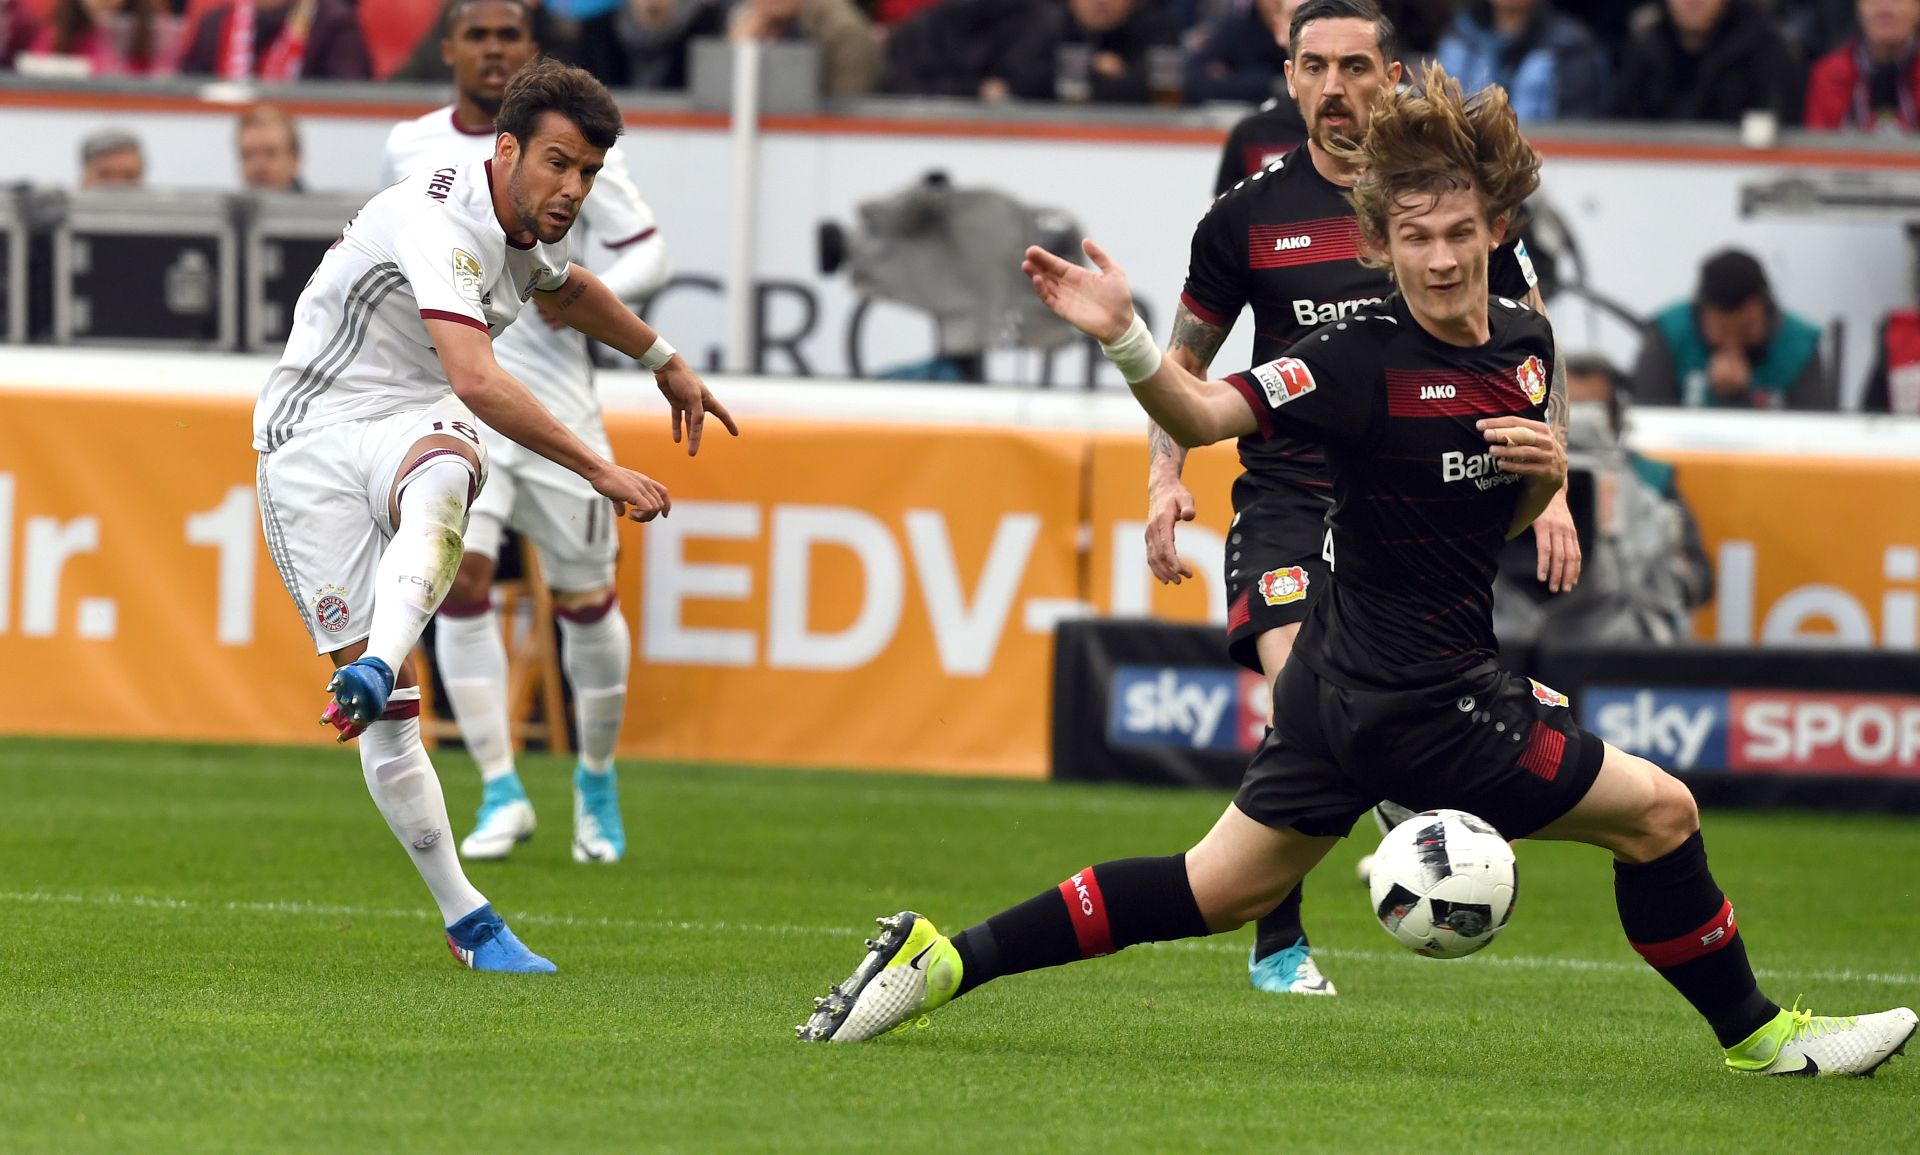 Leverkusen's Tin Jedvaj (R) and Munich's Juan Bernat vie for the ball during the German Bundesliga soccer match between Bayer Leverkusen and Bayern Munich at the BayArena in Leverkusen, Germany, 15 April 2017. 



(EMBARGO CONDITIONS - ATTENTION: Due to the accreditation guidelines, the DFL only permits the publication and utilisation of up to 15 pictures per match on the internet and in online media during the match.) Photo: Federico Gambarini/dpa